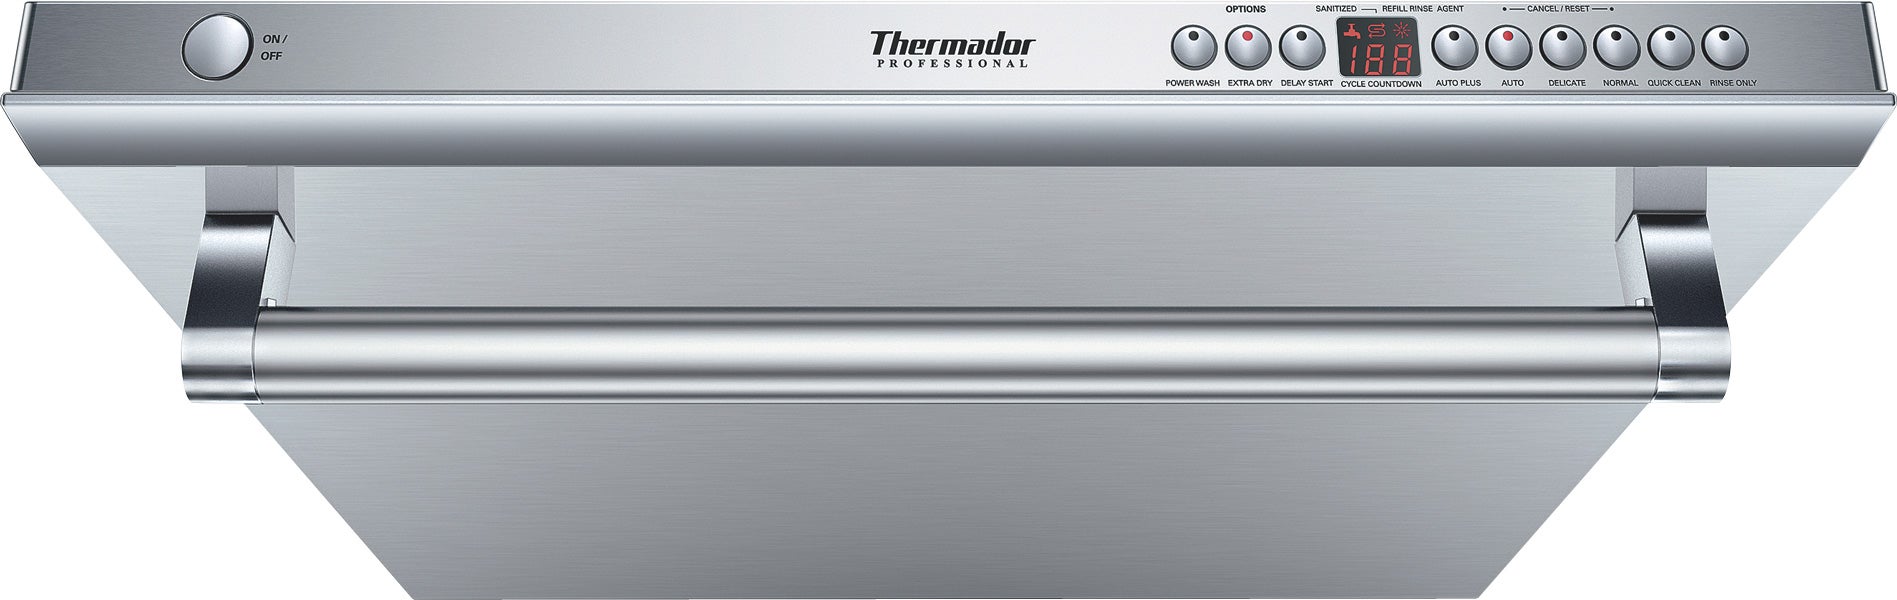 Thermador DWHD630GCP